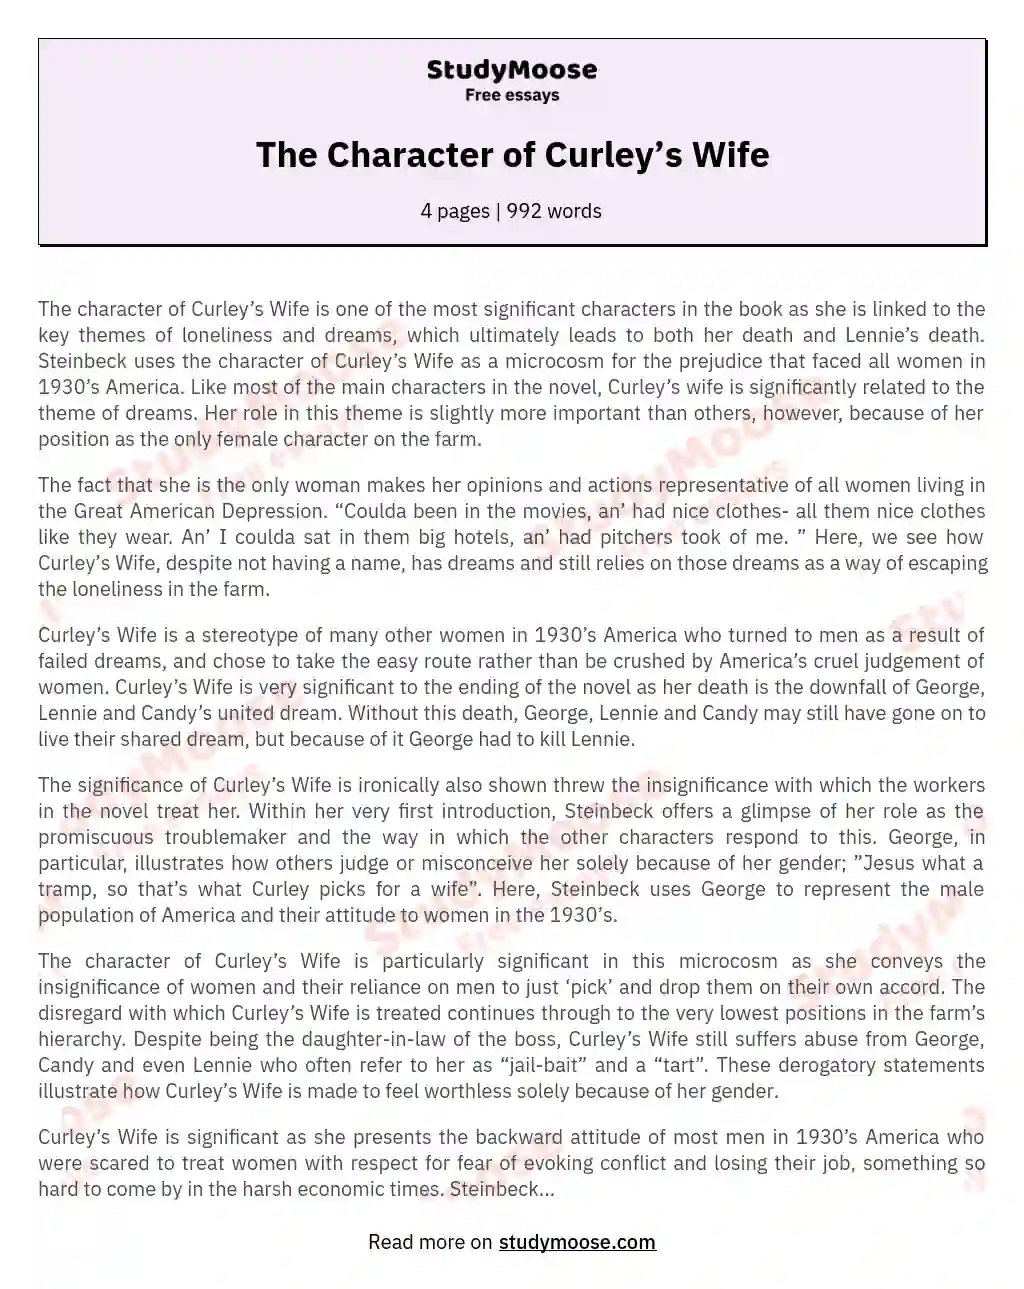 The Character of Curley’s Wife essay